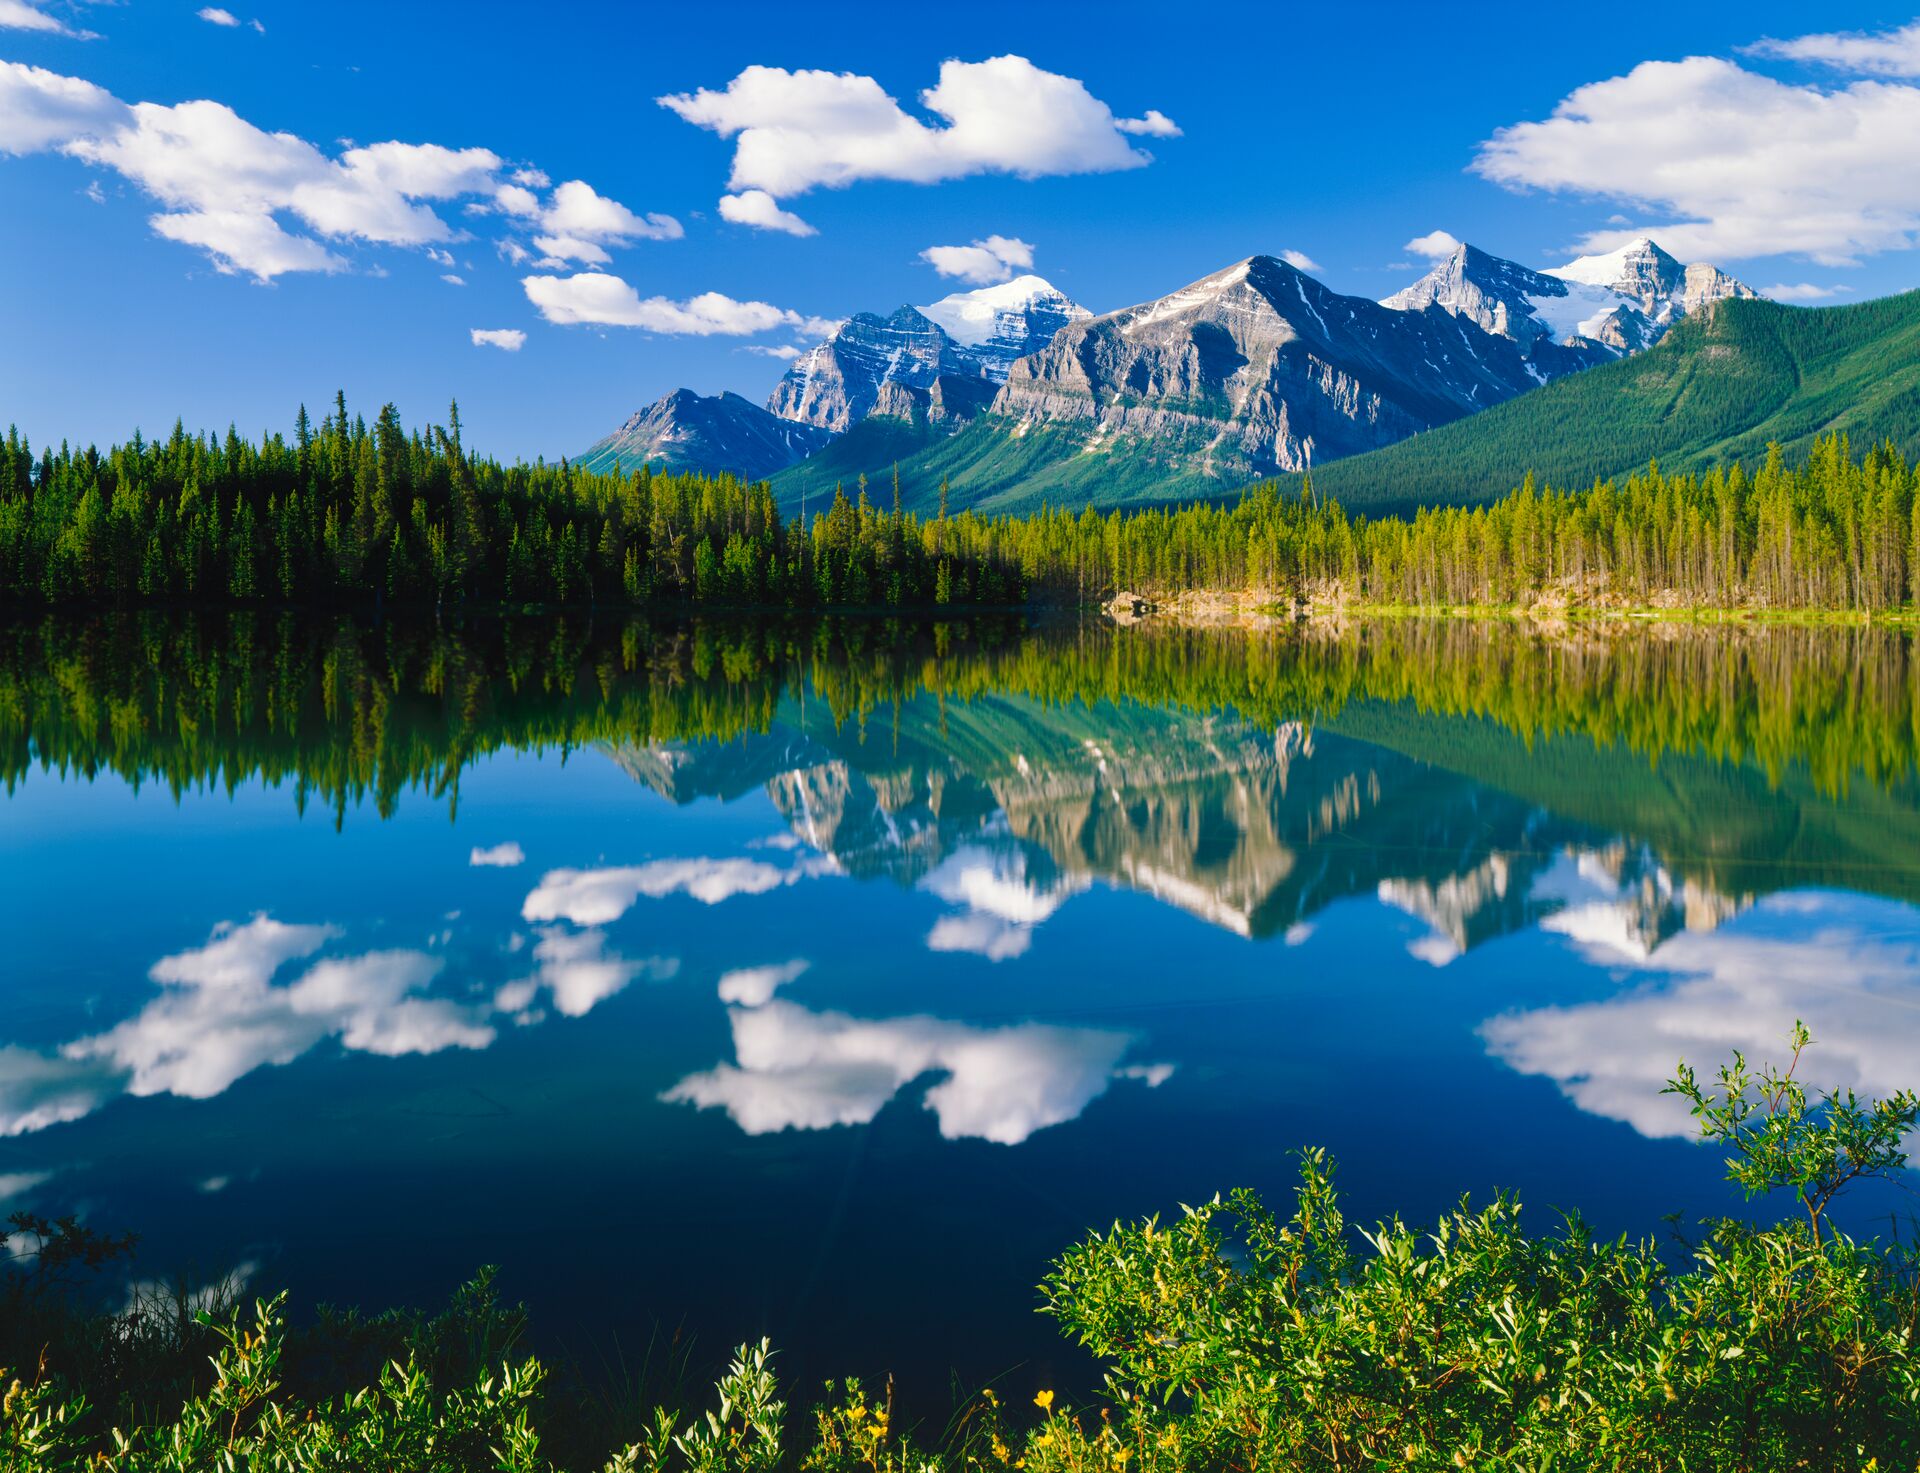 Banff park in Canada glistens with white clouds, bright blue sky, snow capped mountain in the background with the forest and lake in front, reflecting the clouds